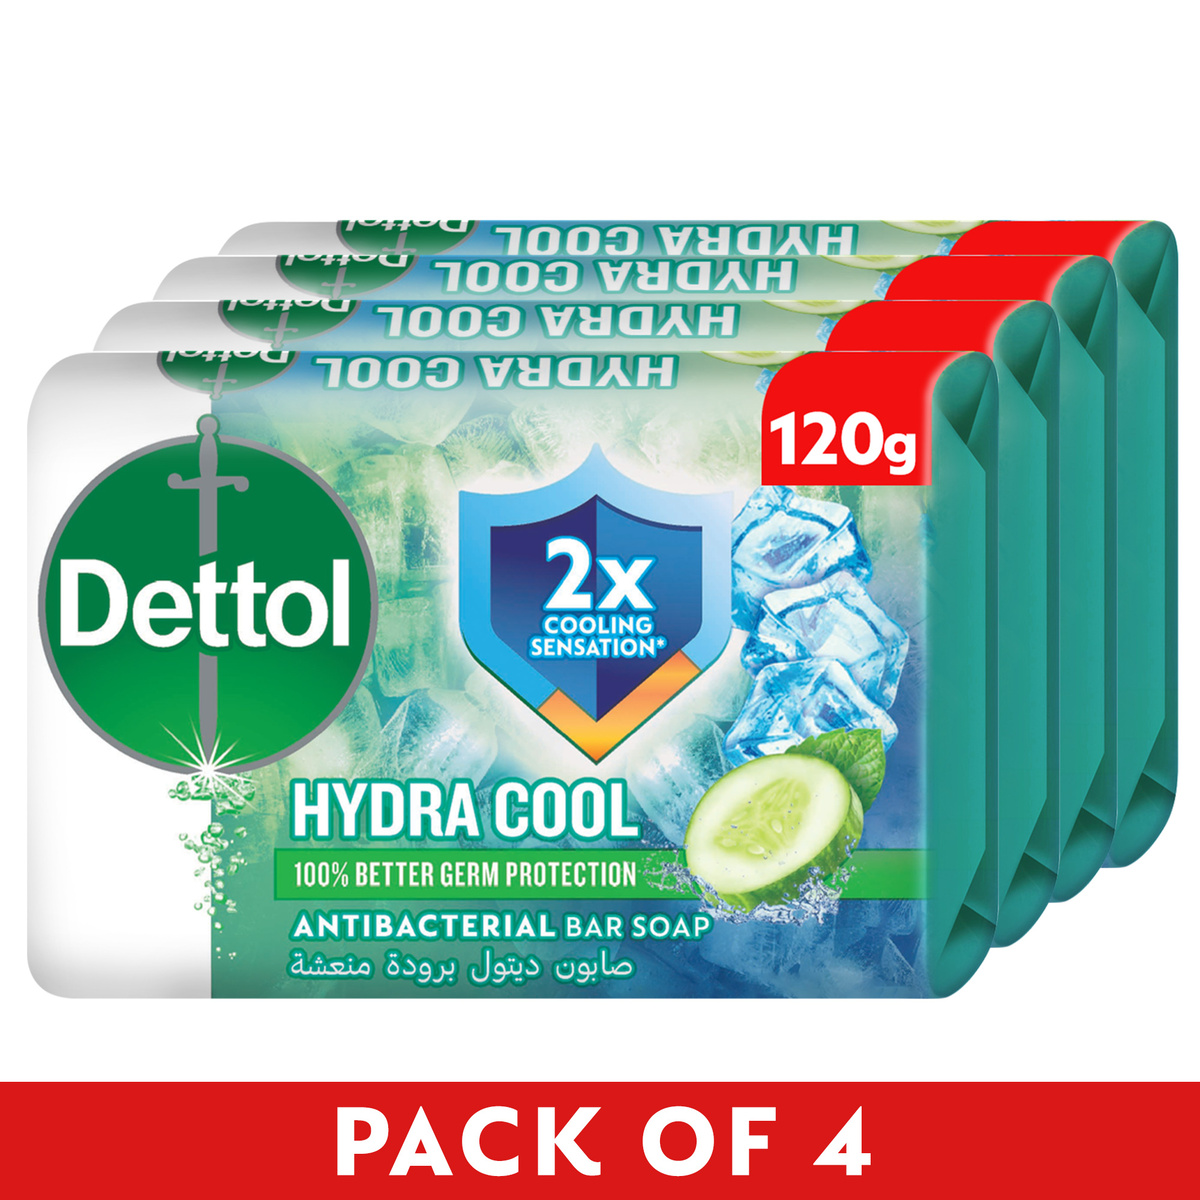 Buy Dettol Hydra Cool Antibacterial Bar Soap Cucumber & Icy Menthol Fragrance Value Pack 4 x 120 g Online at Best Price | World Cleanup Days - R&B | Lulu UAE in UAE